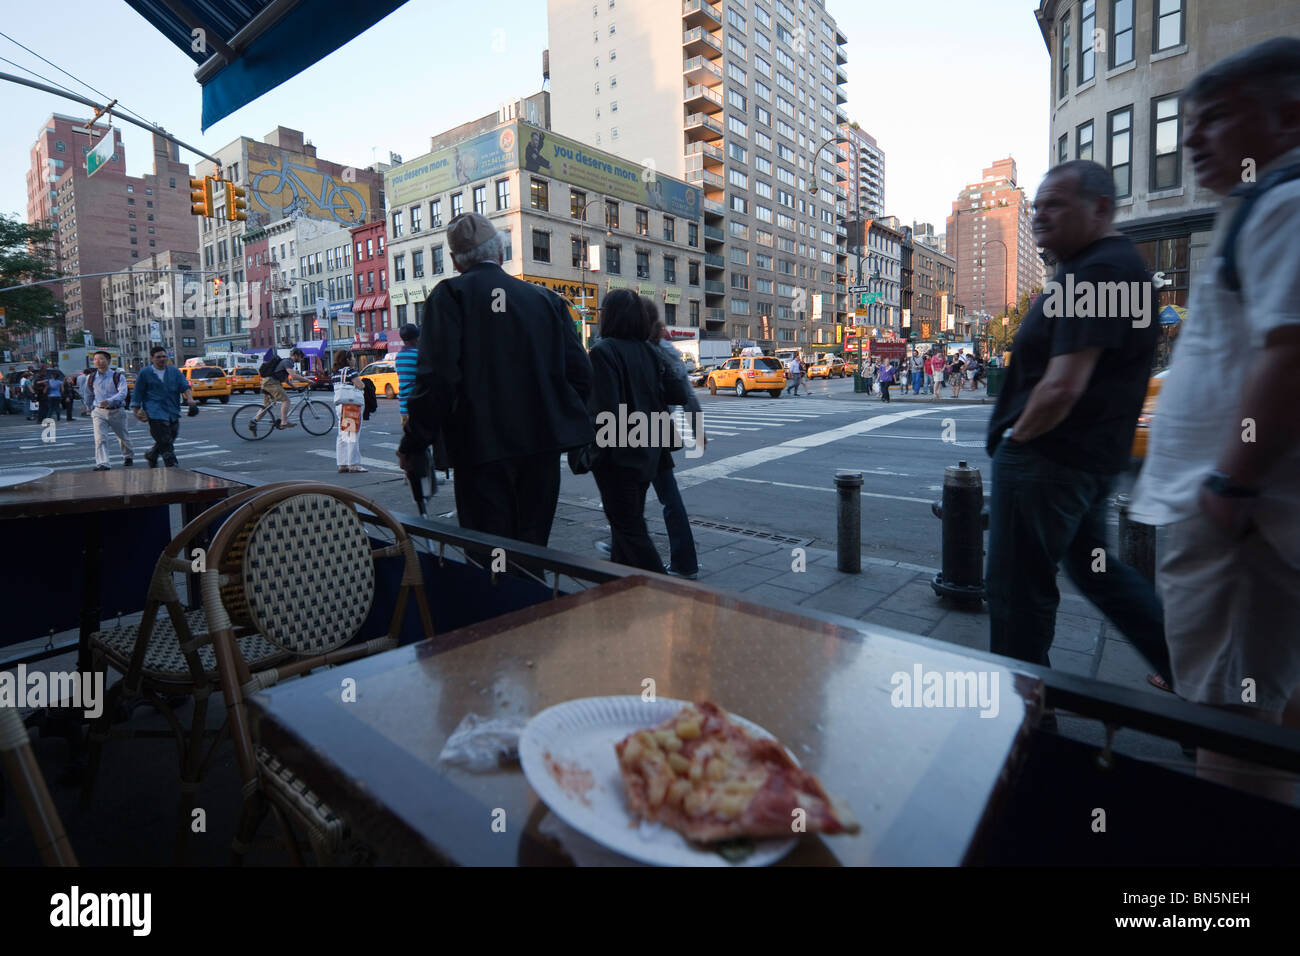 street scene with unfinished pizza, pedestrians, 41st Street and 8th Avenue, New York City Stock Photo